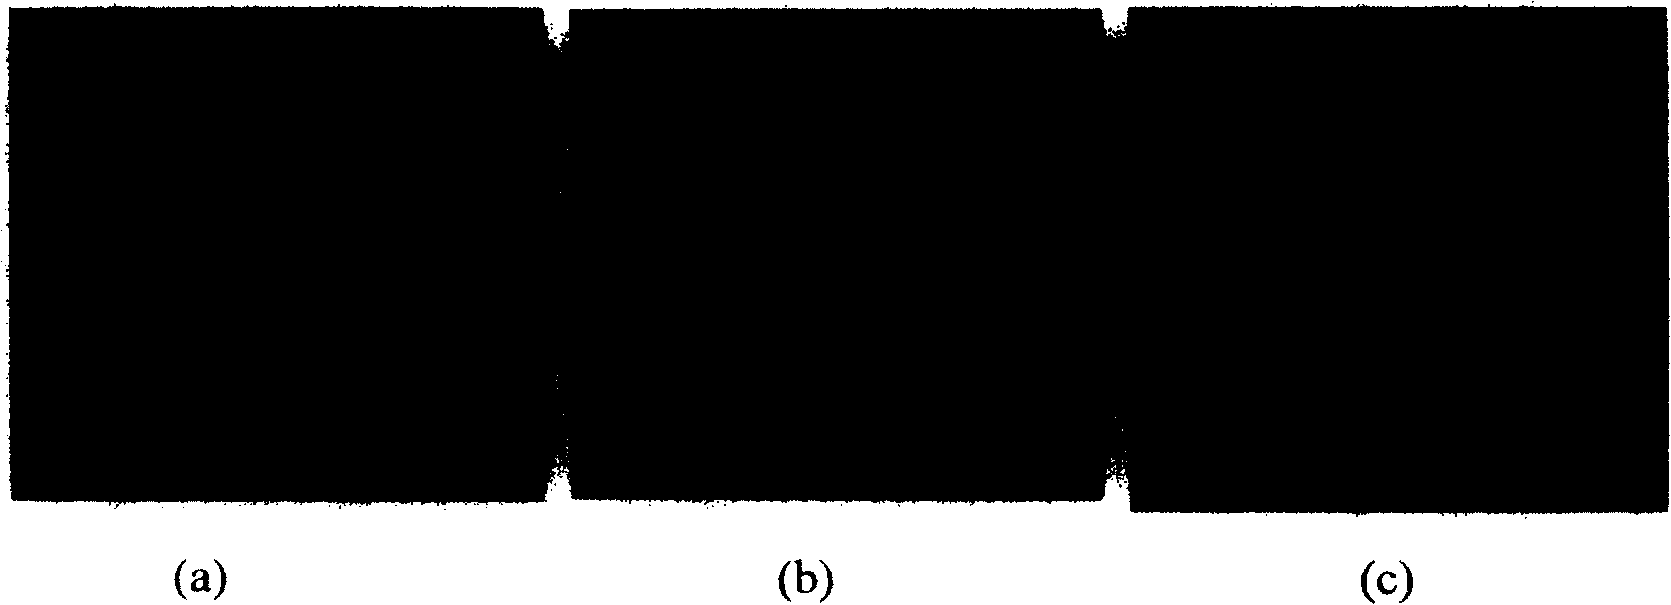 Ultralow dielectric constant polyimide film and its preparation method